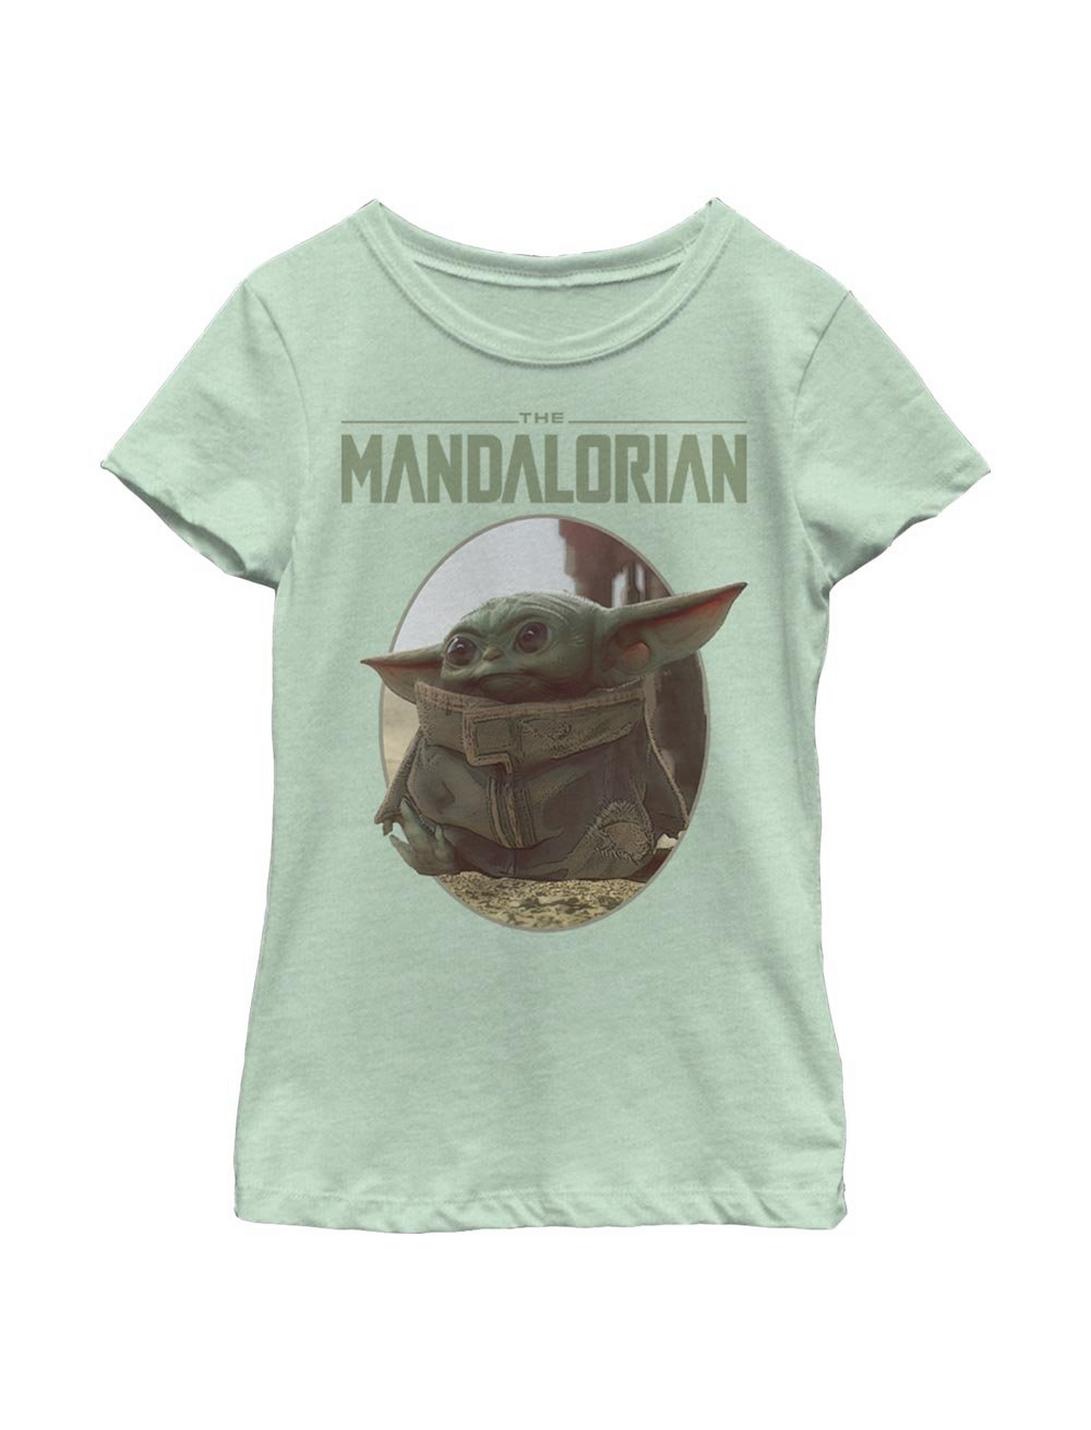 Plus Size Star Wars The Mandalorian The Child Cute Look Youth Girls T-Shirt, MINT, hi-res